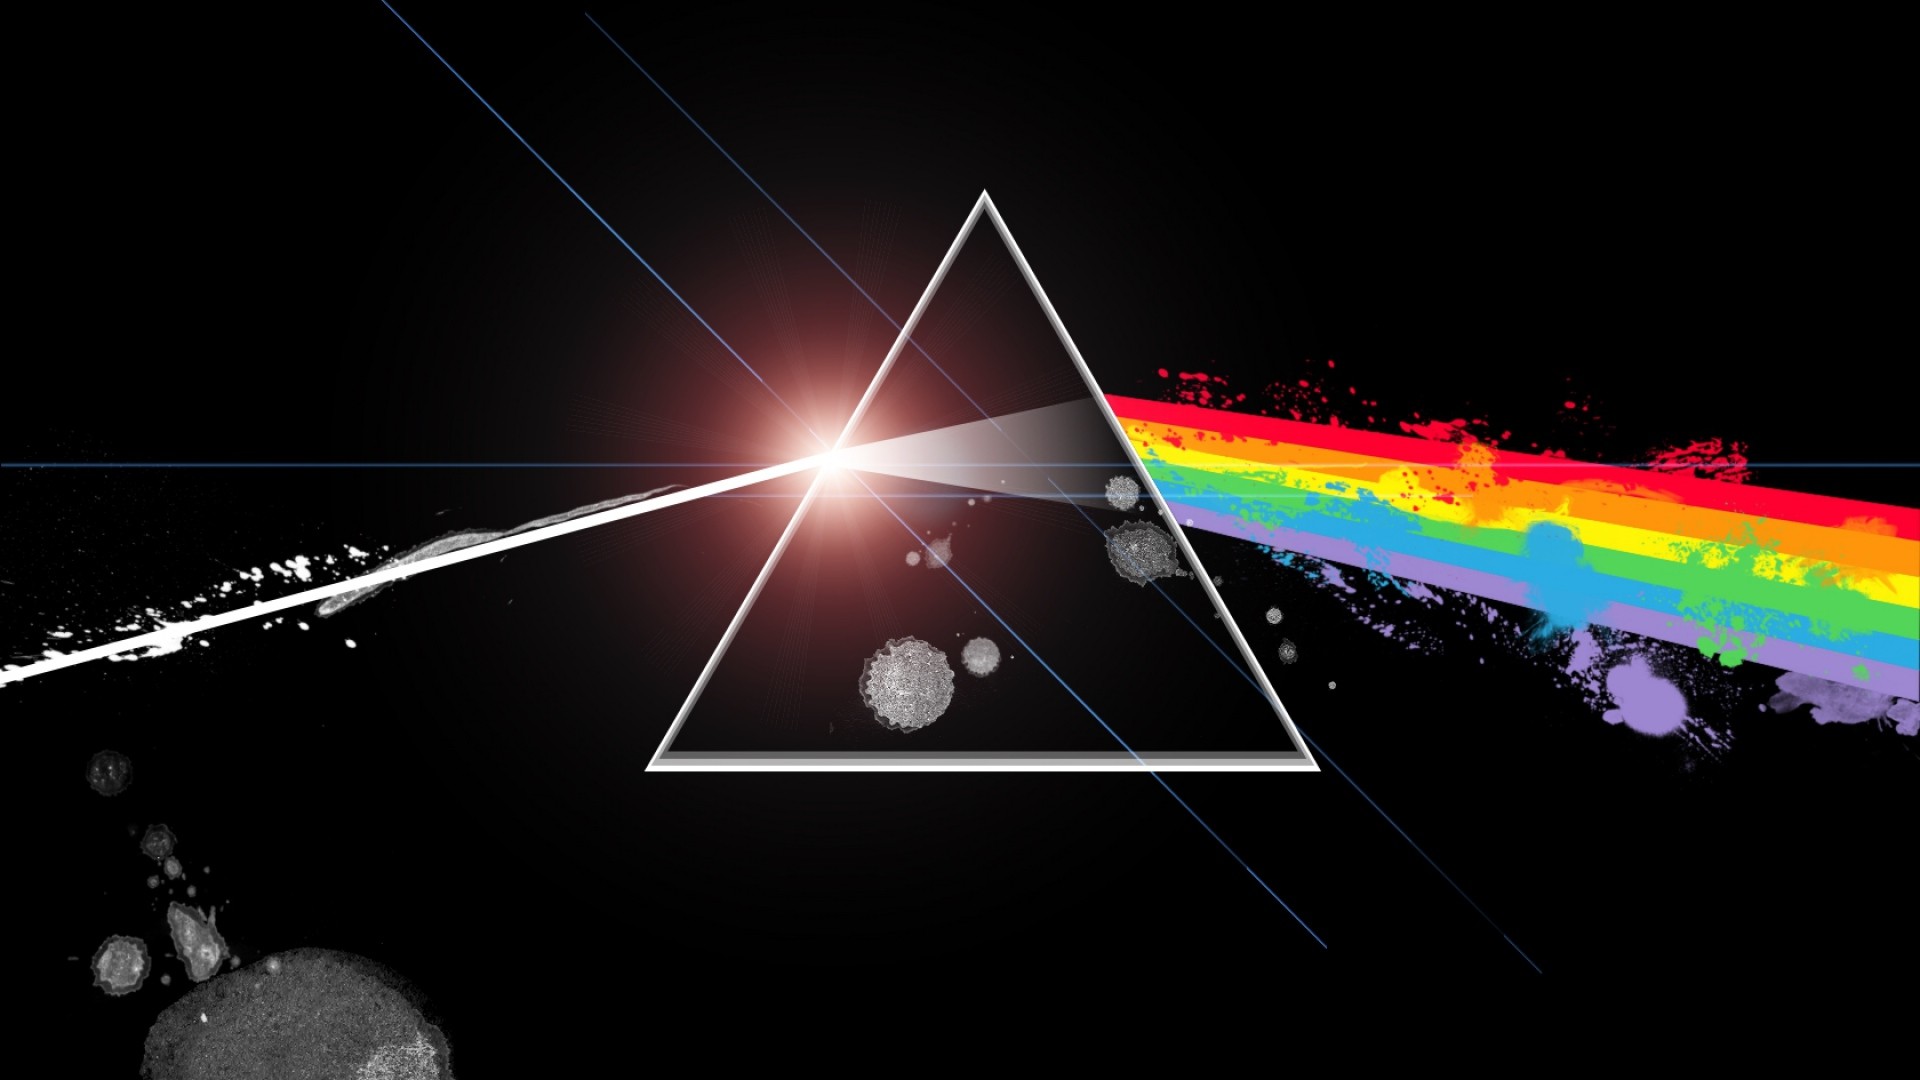 Pink Floyd wallpaper by lUCAoxD  Download on ZEDGE  c4d2